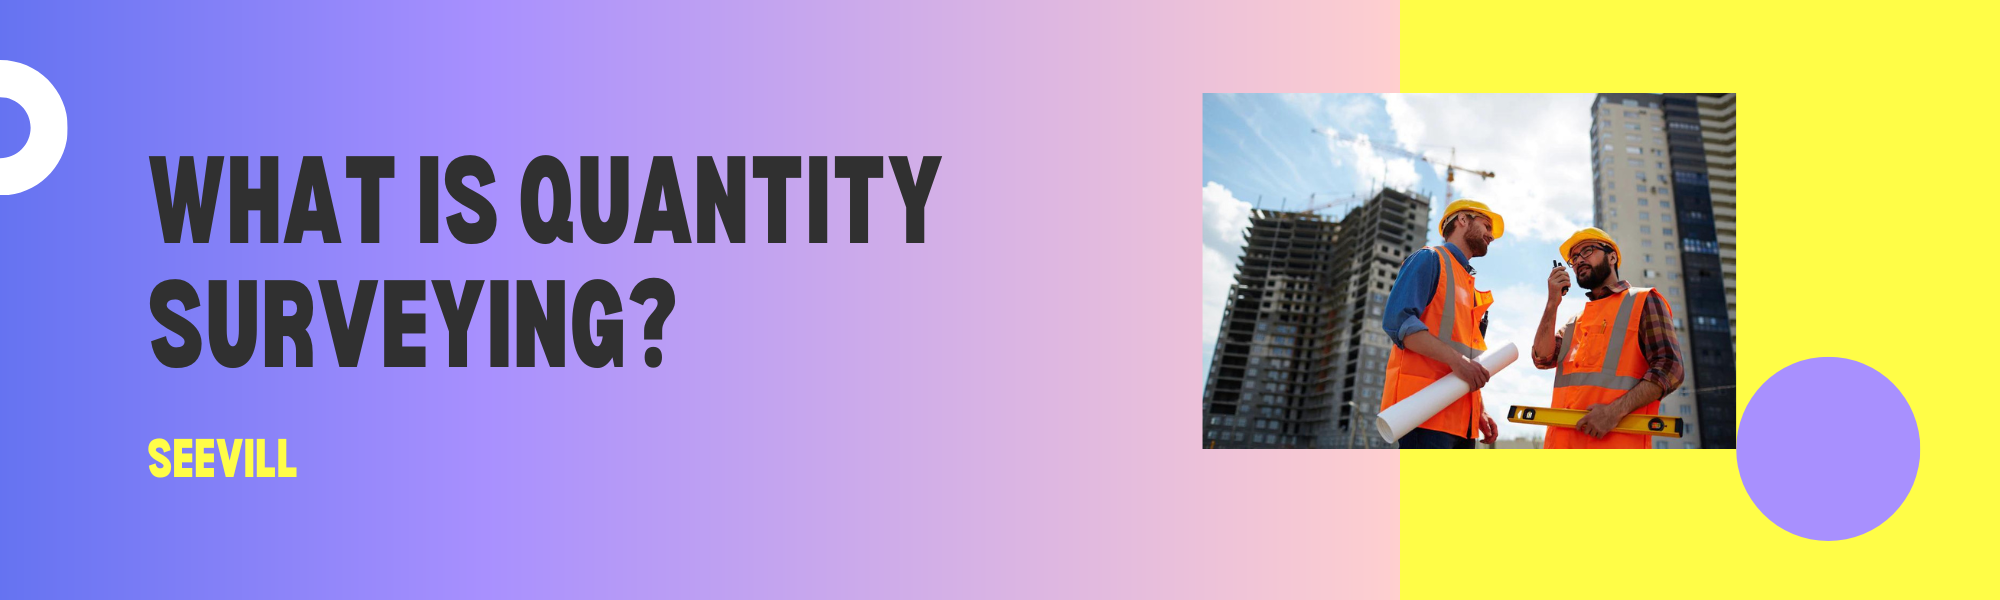 WHAT IS QUANTITY SURVEYING